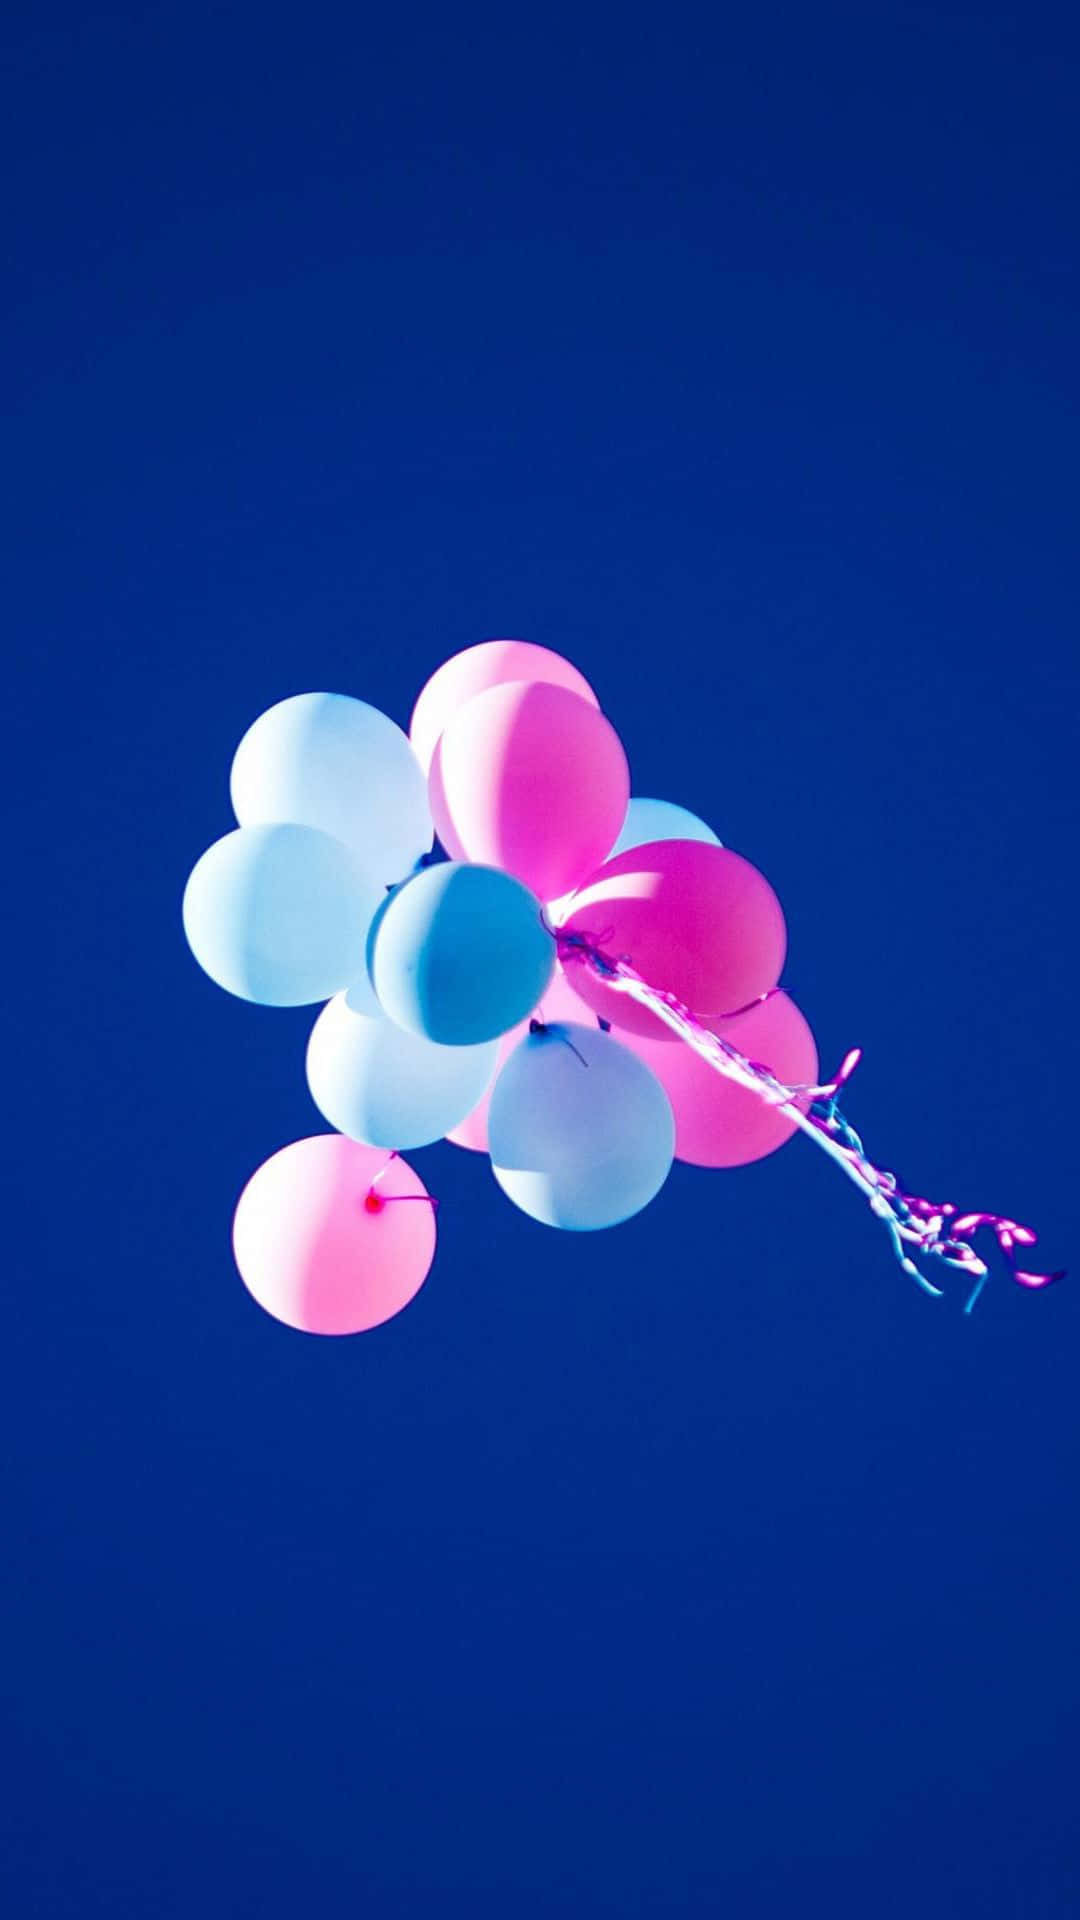 Celebrate with Colorful Pink Balloons